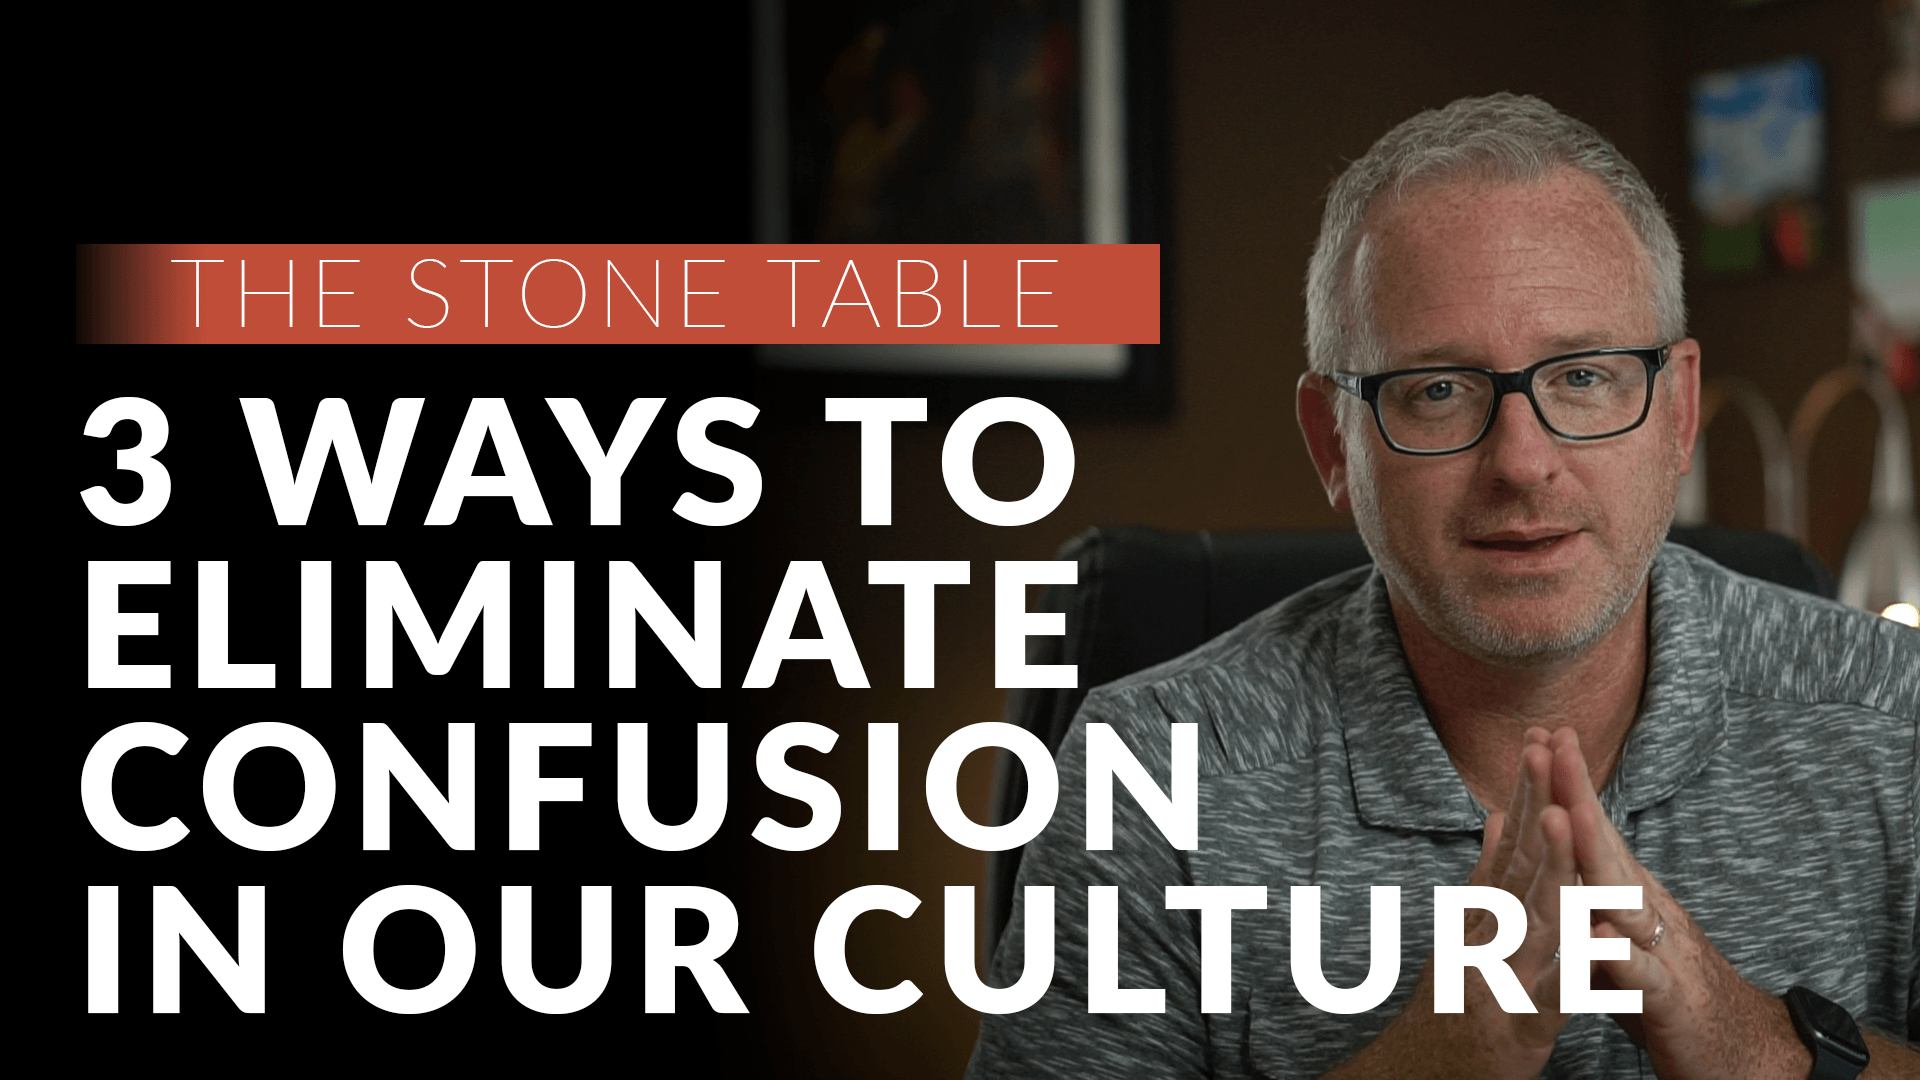 3 Ways to Eliminate Confusion in Our Culture